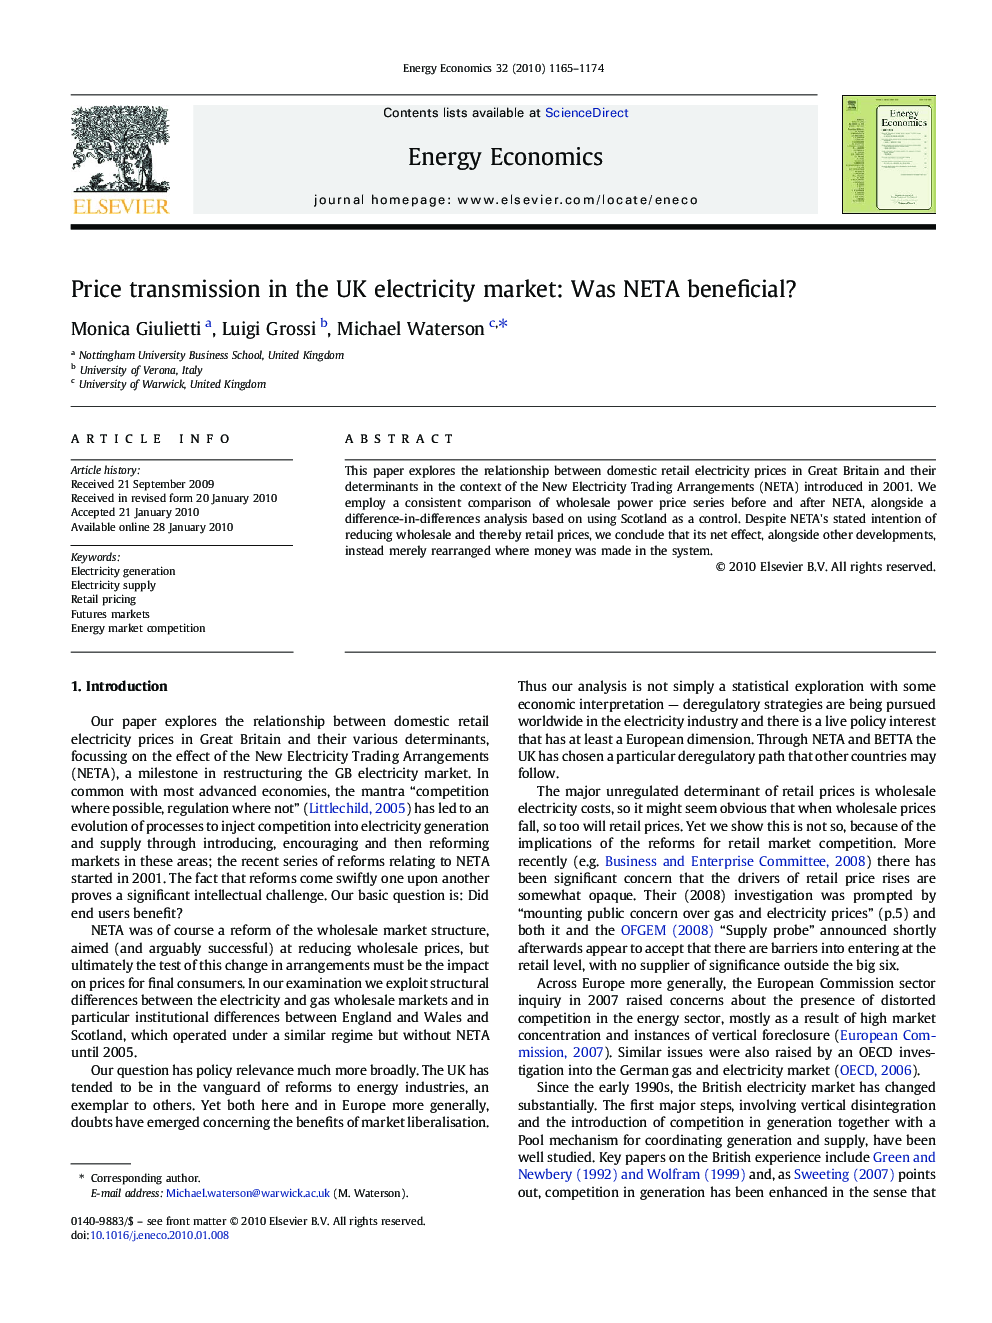 Price transmission in the UK electricity market: Was NETA beneficial?